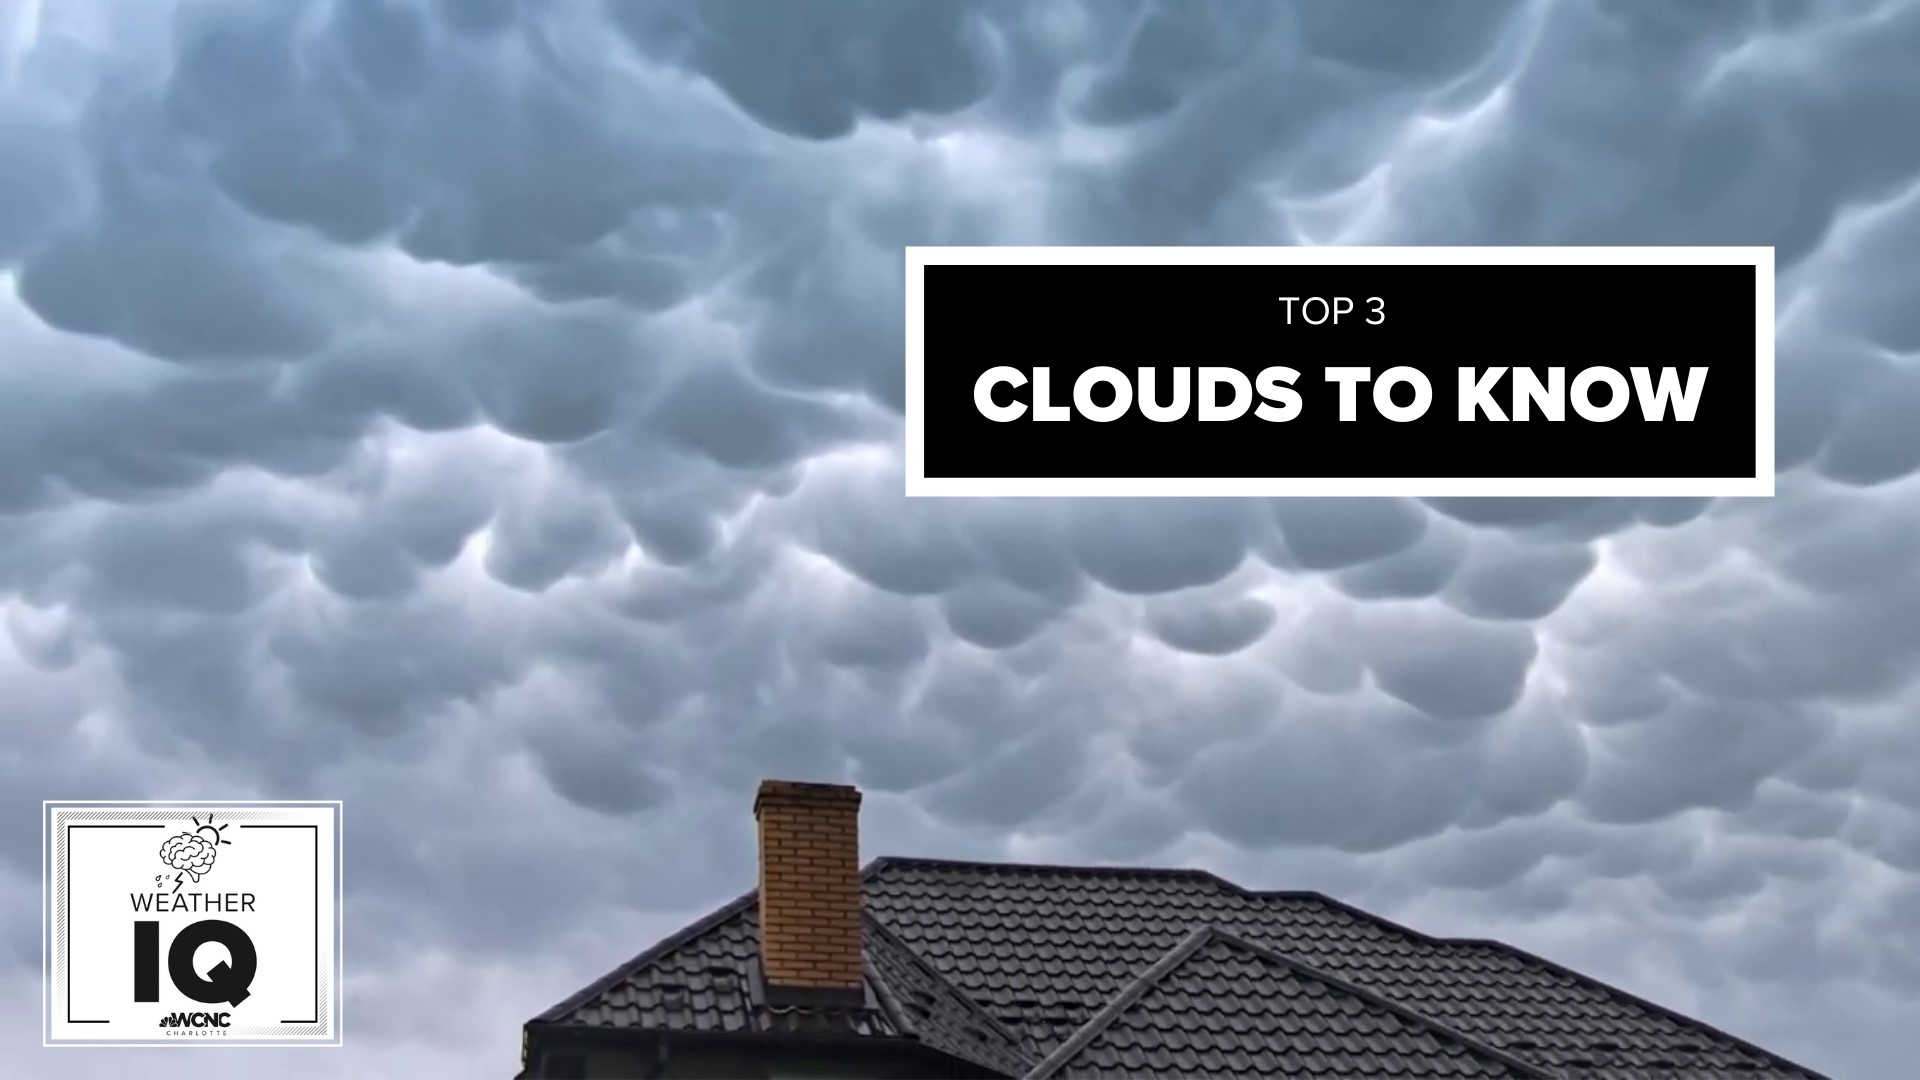 The mammatus, shelf cloud and wall cloud are all clouds we should know about. The funnel cloud of course belongs on this list as well. Here is how we identify them.